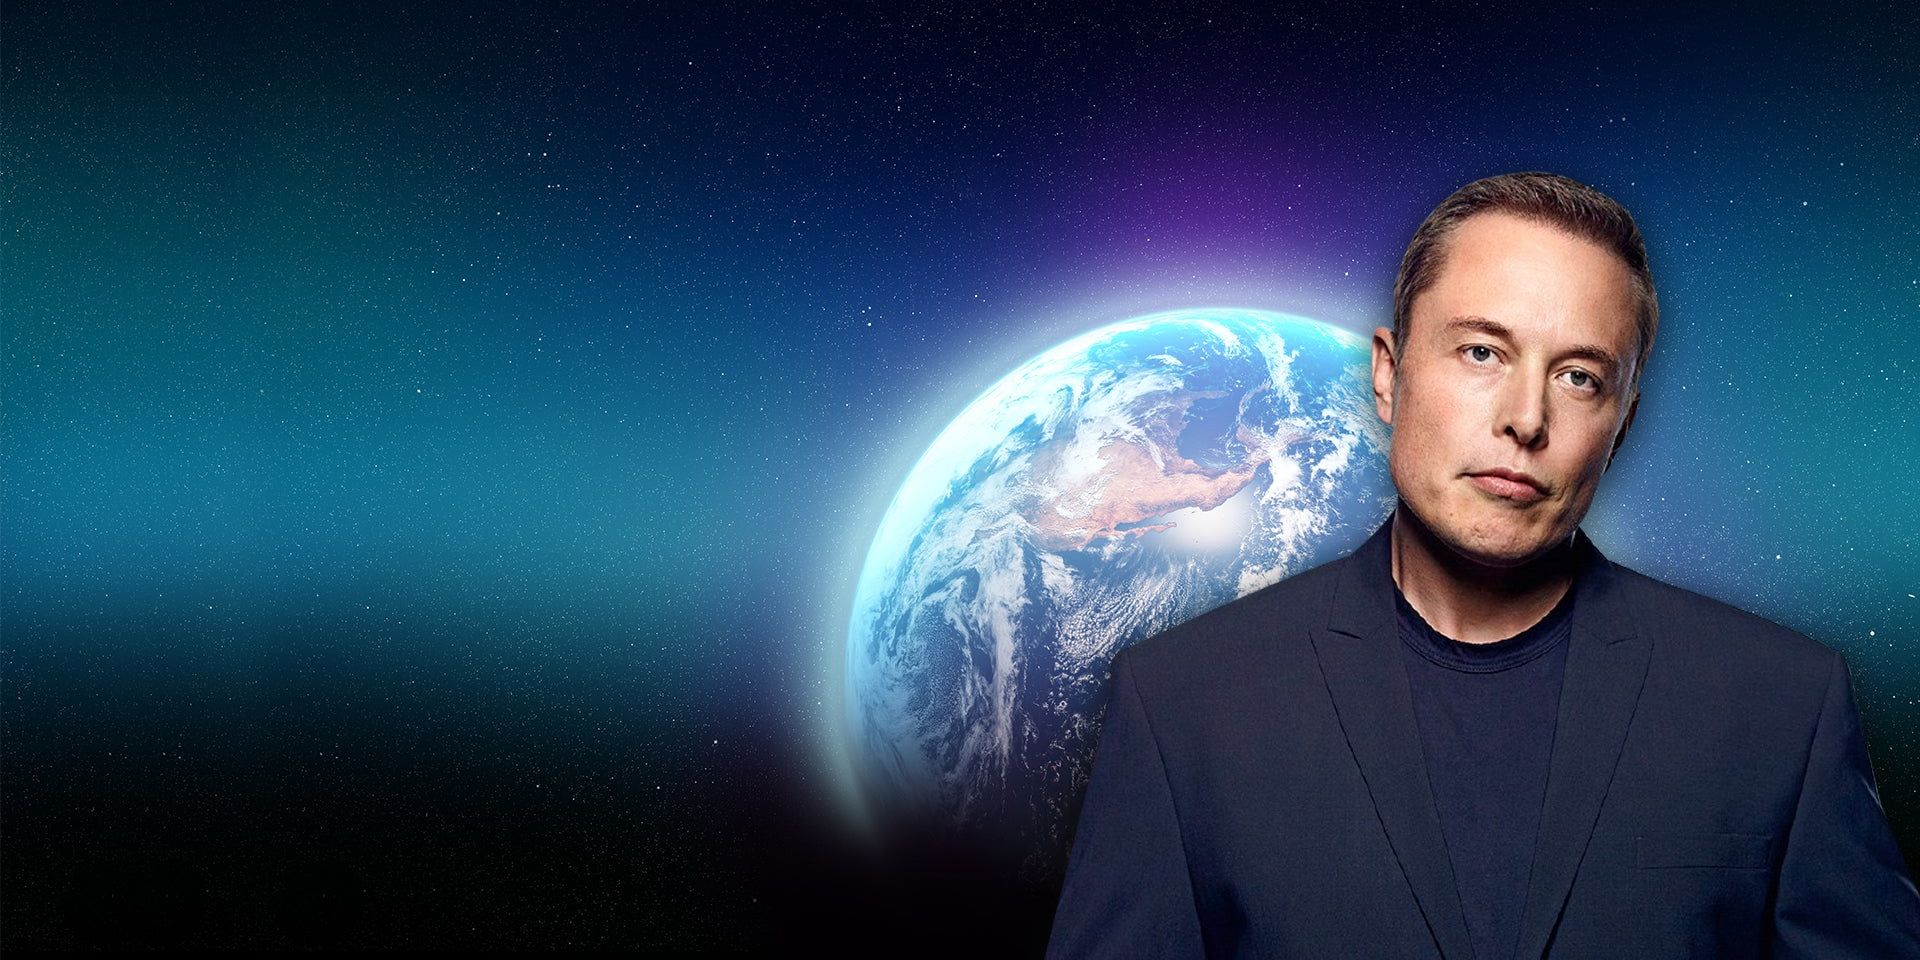 Elon Musk in front of a space and Earth background